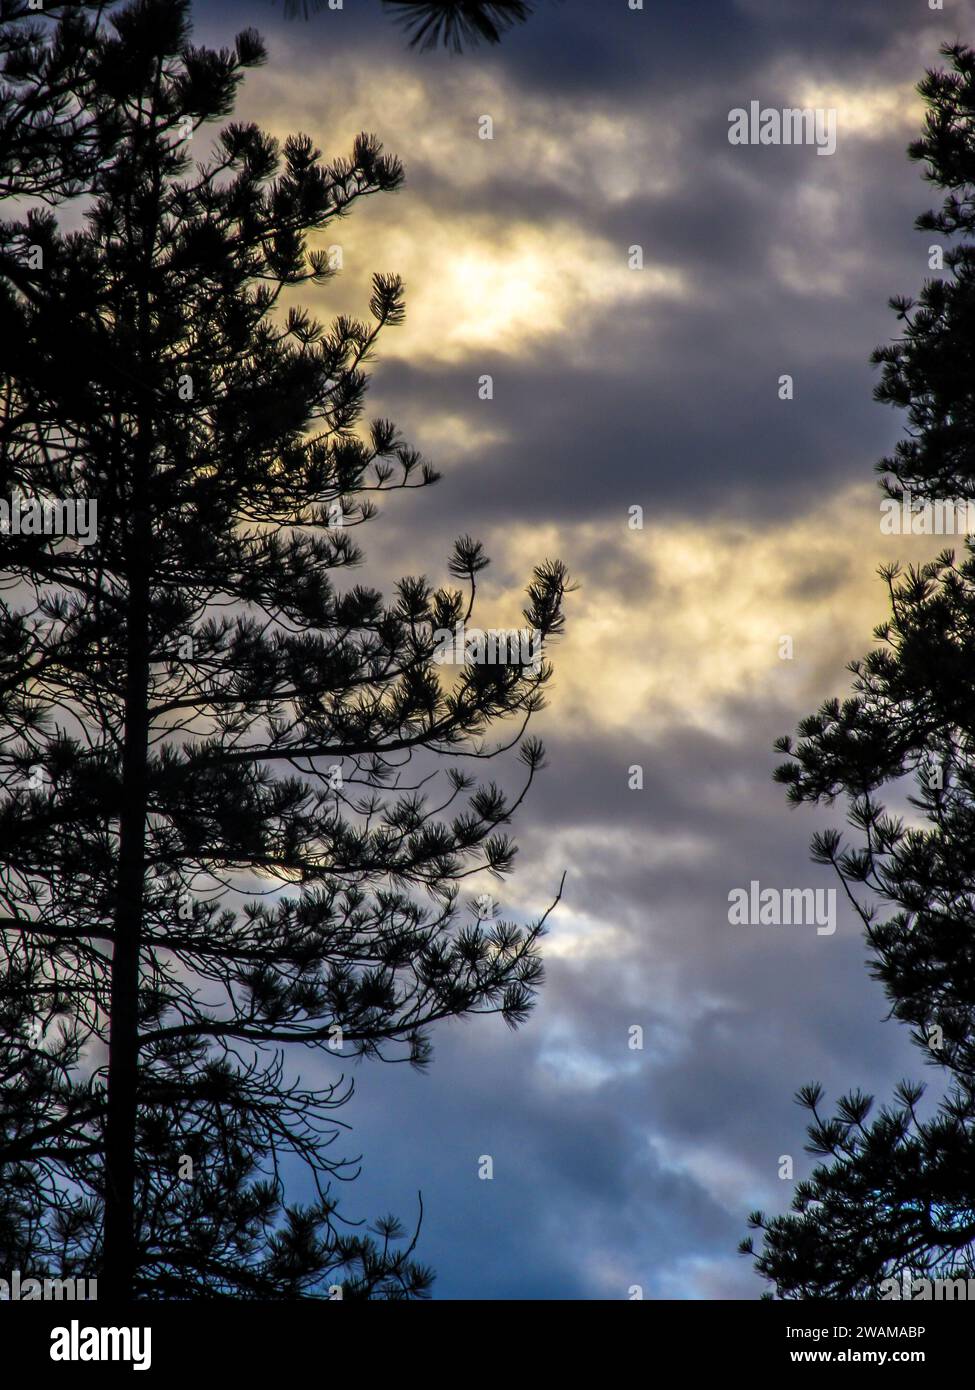 Gold blue and grey sunrise with the silhouettes of pine trees in the foreground Stock Photo